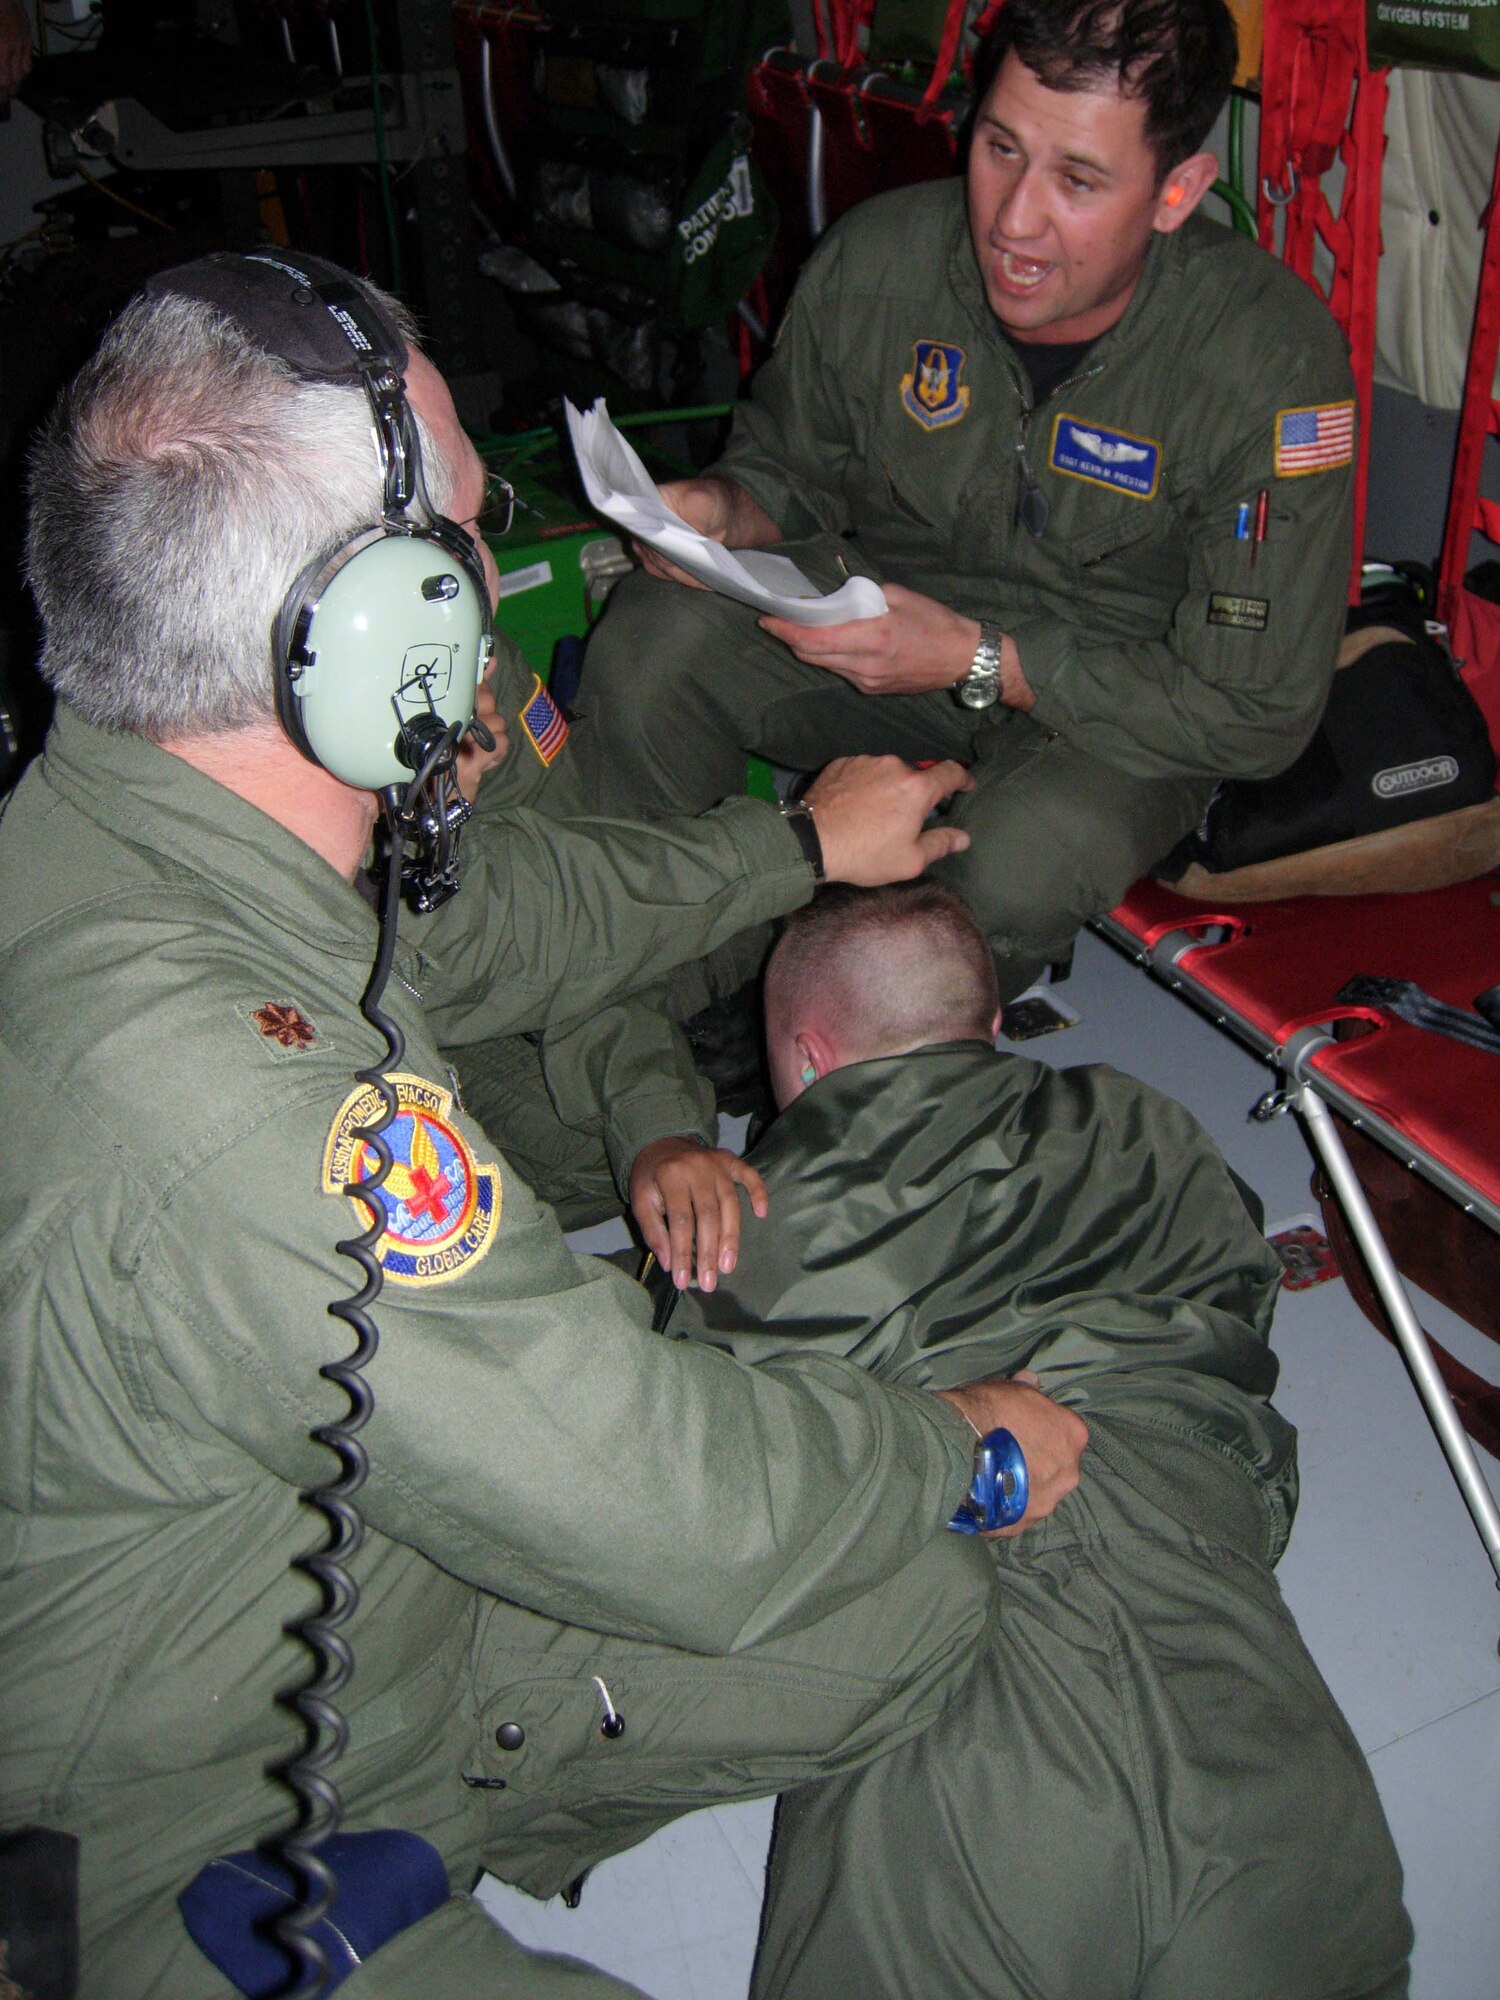 ST. CROIX, U.S. VIRGIN ISLANDS -- Maj. Bryan Castle, 439th Aeromedical Evacuation Squadron flight nurse, simulates subduing Senior Airman Carl Stewart II, 459th Aeromedical Evacuation Squadron medical technician, as Staff Sgt. Kevin Preston calls out procedures during an in-flight exercise. Airman Stewart simulated a mentally impaired passenger who attempted to open cabin doors during the flight. Ten members of the 439th AES joined more than a dozen 459th AES members in a blended AE training mission to the island. Mission training expanded beyond the medical realm to include air refueling and an overseas sortie. (U.S. Air Force photo/Staff Sgt. Amaani Lyle)